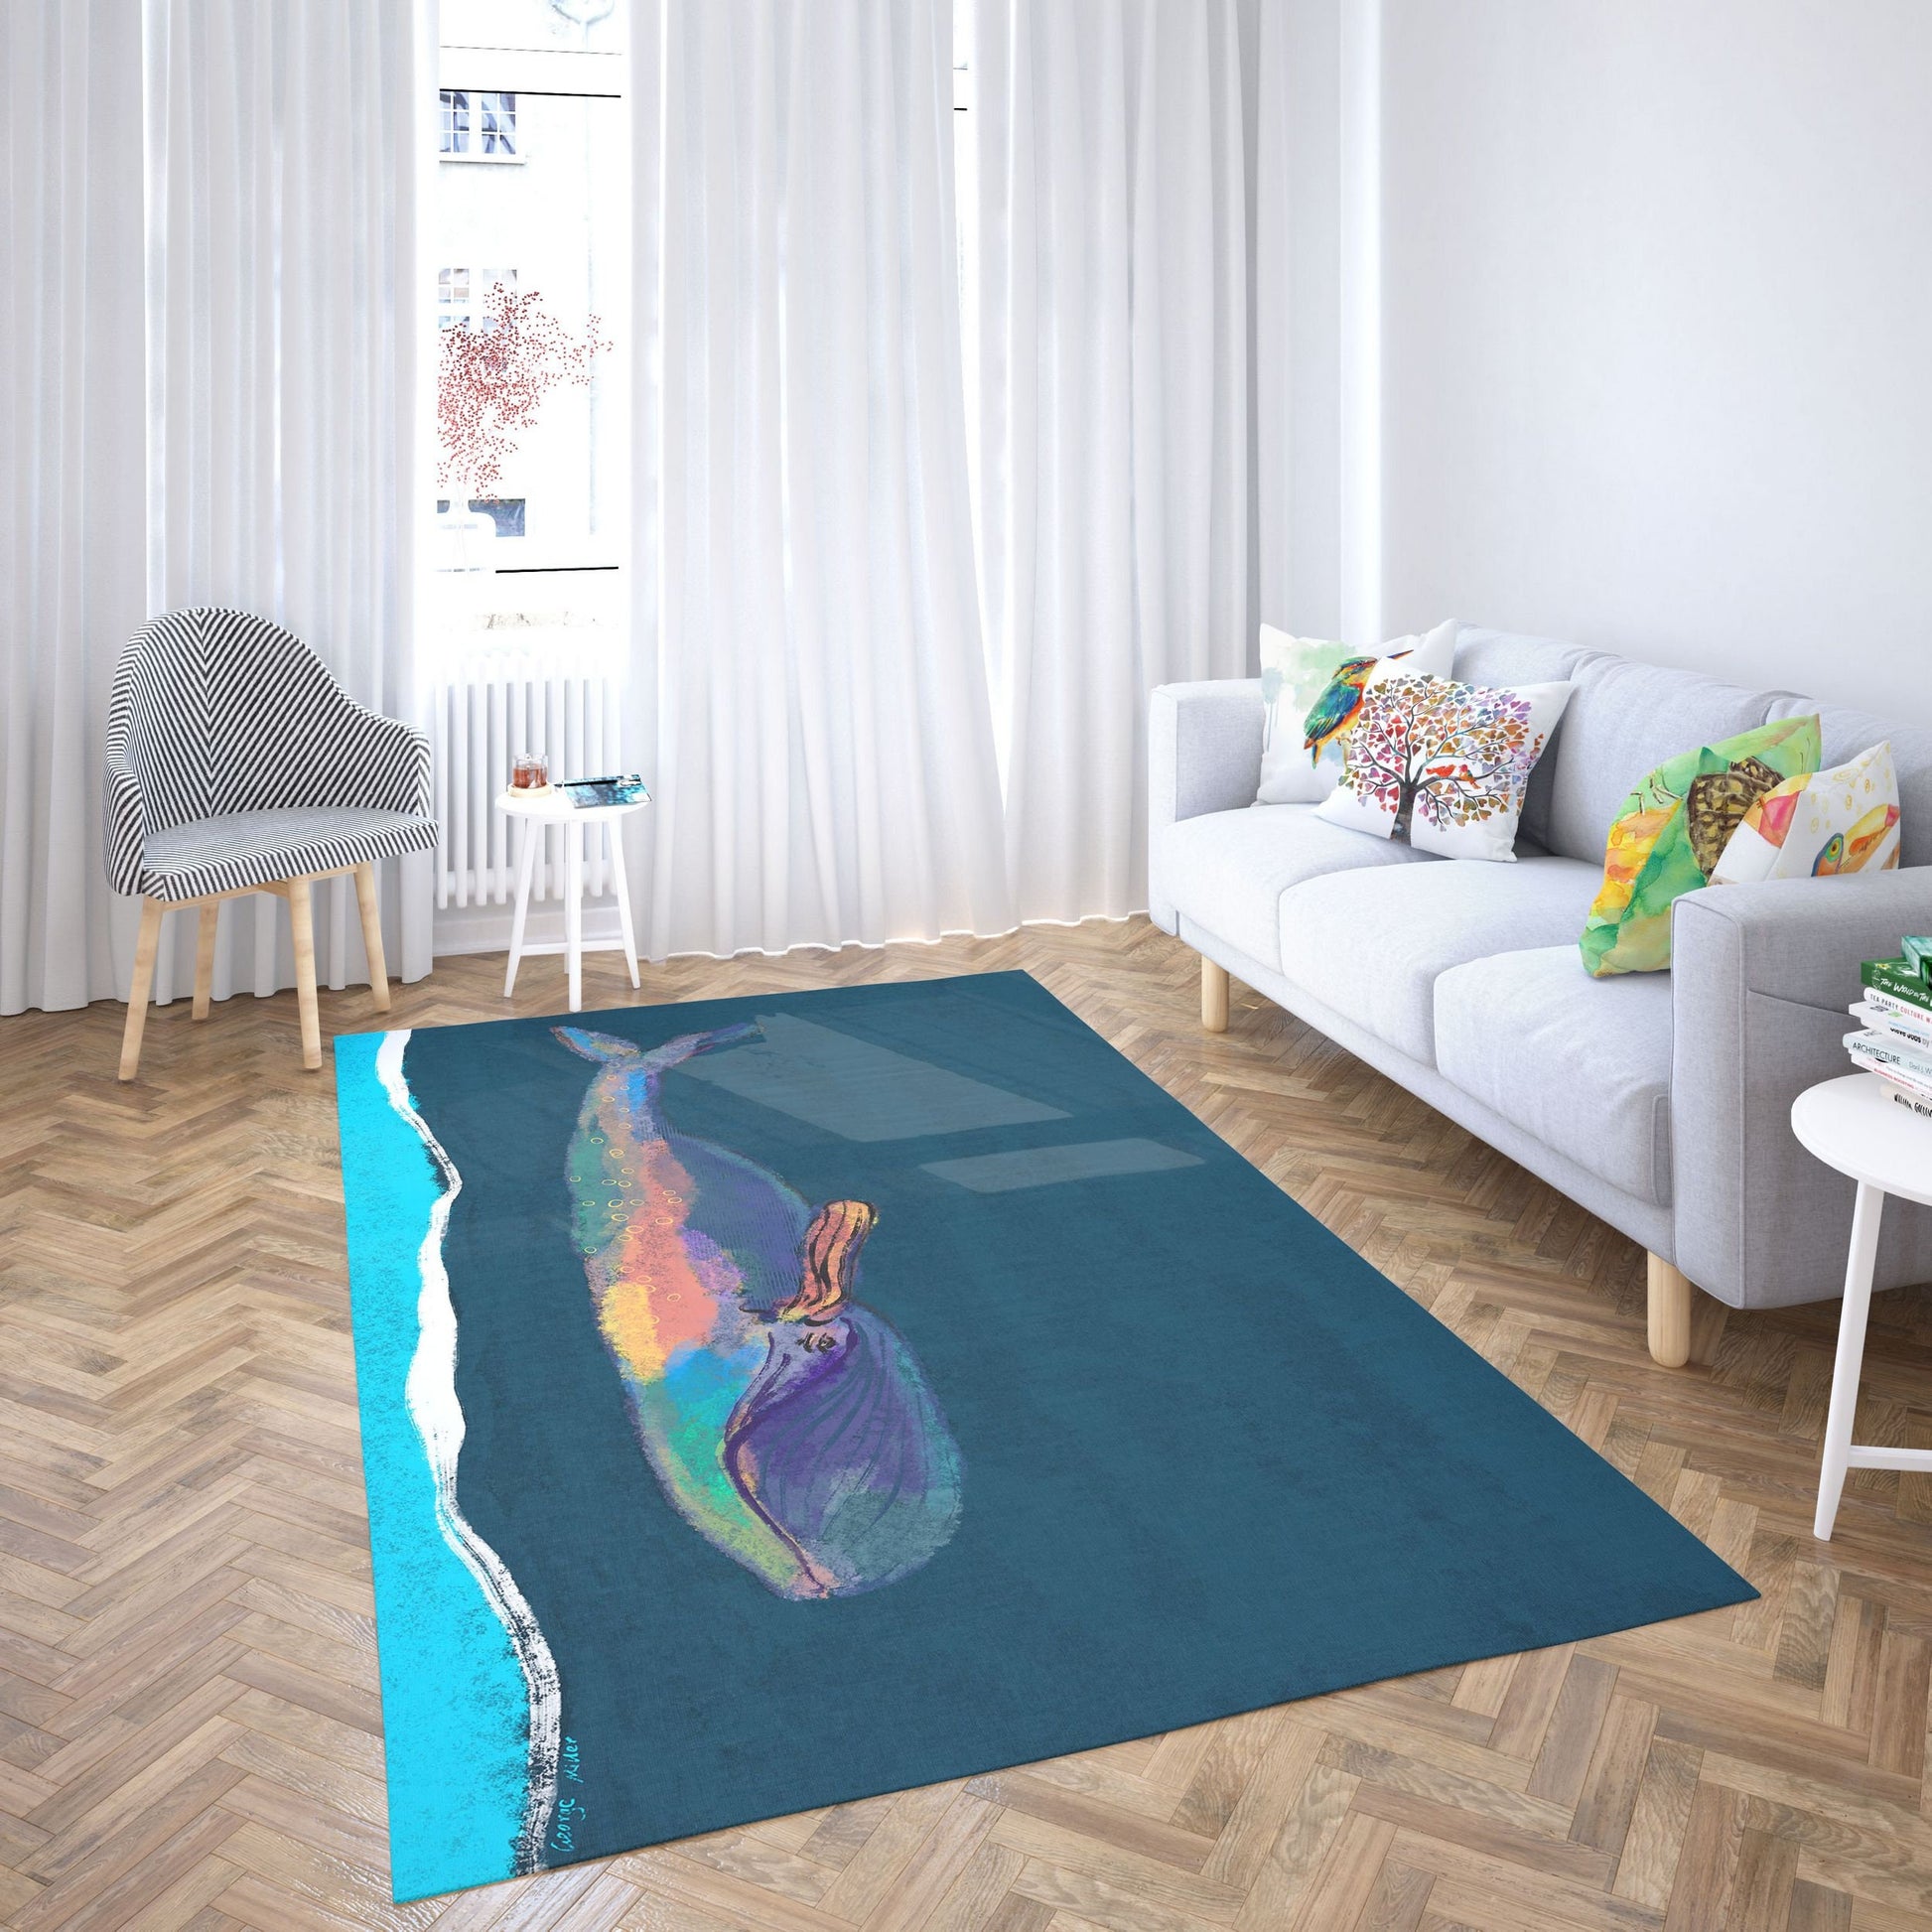 Kids Rug, Best Area Rug, 4X6 Area Rug, Thick Carpet, Rectangle Rug, Colorful Rug, Blue Whale, Modern Area Rug, Living Room Mat, Made In USA